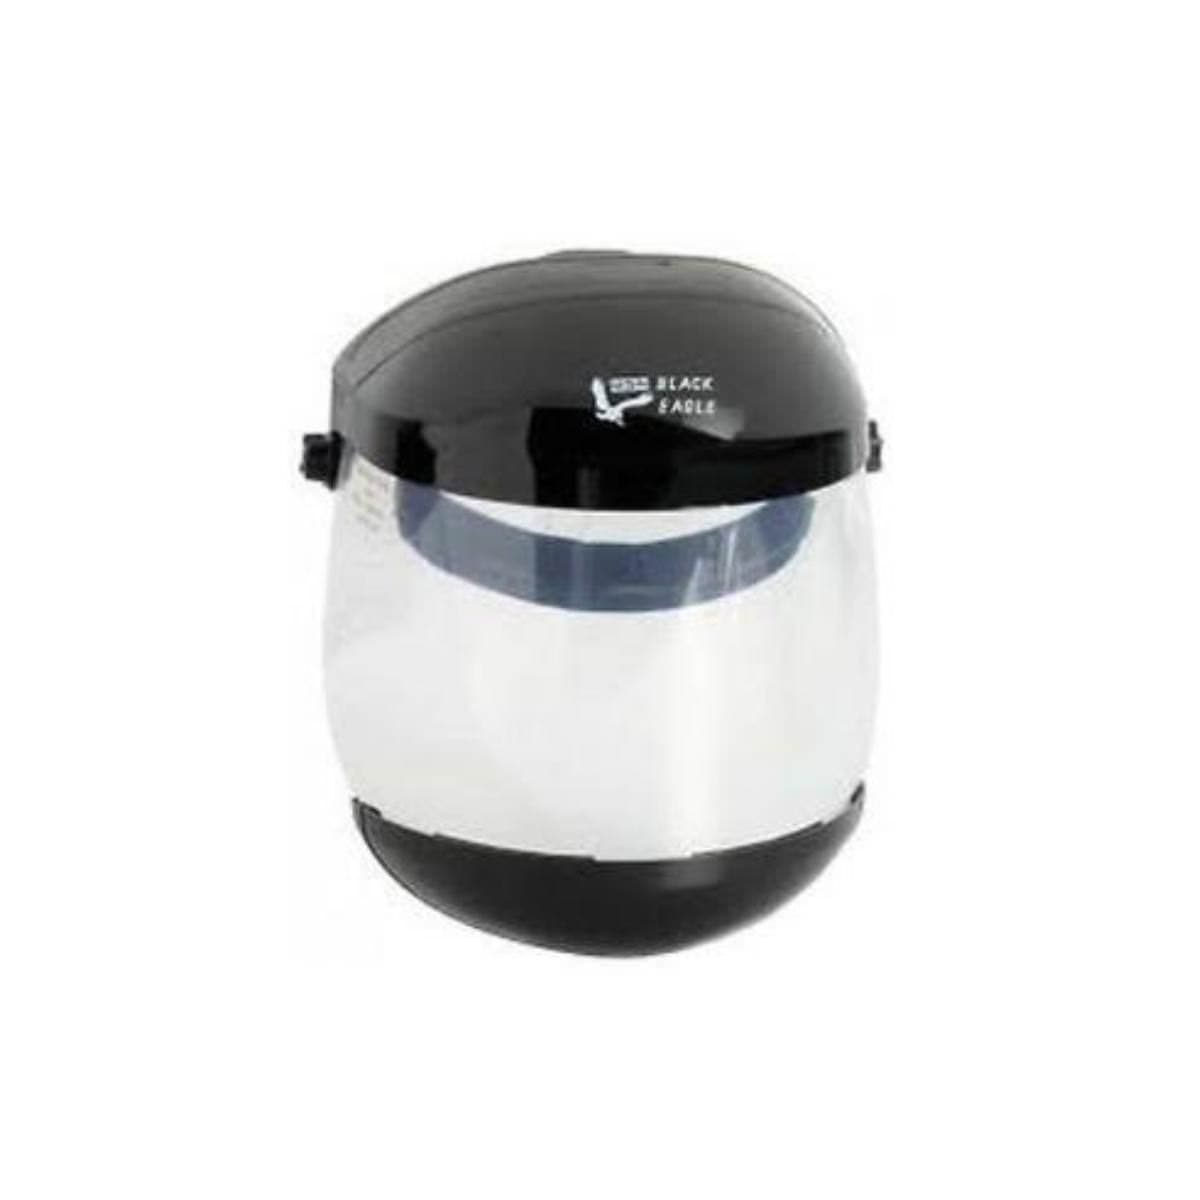 MSA Black Eagle Faceshield Complete With Clear Visor 227500CL (Each)